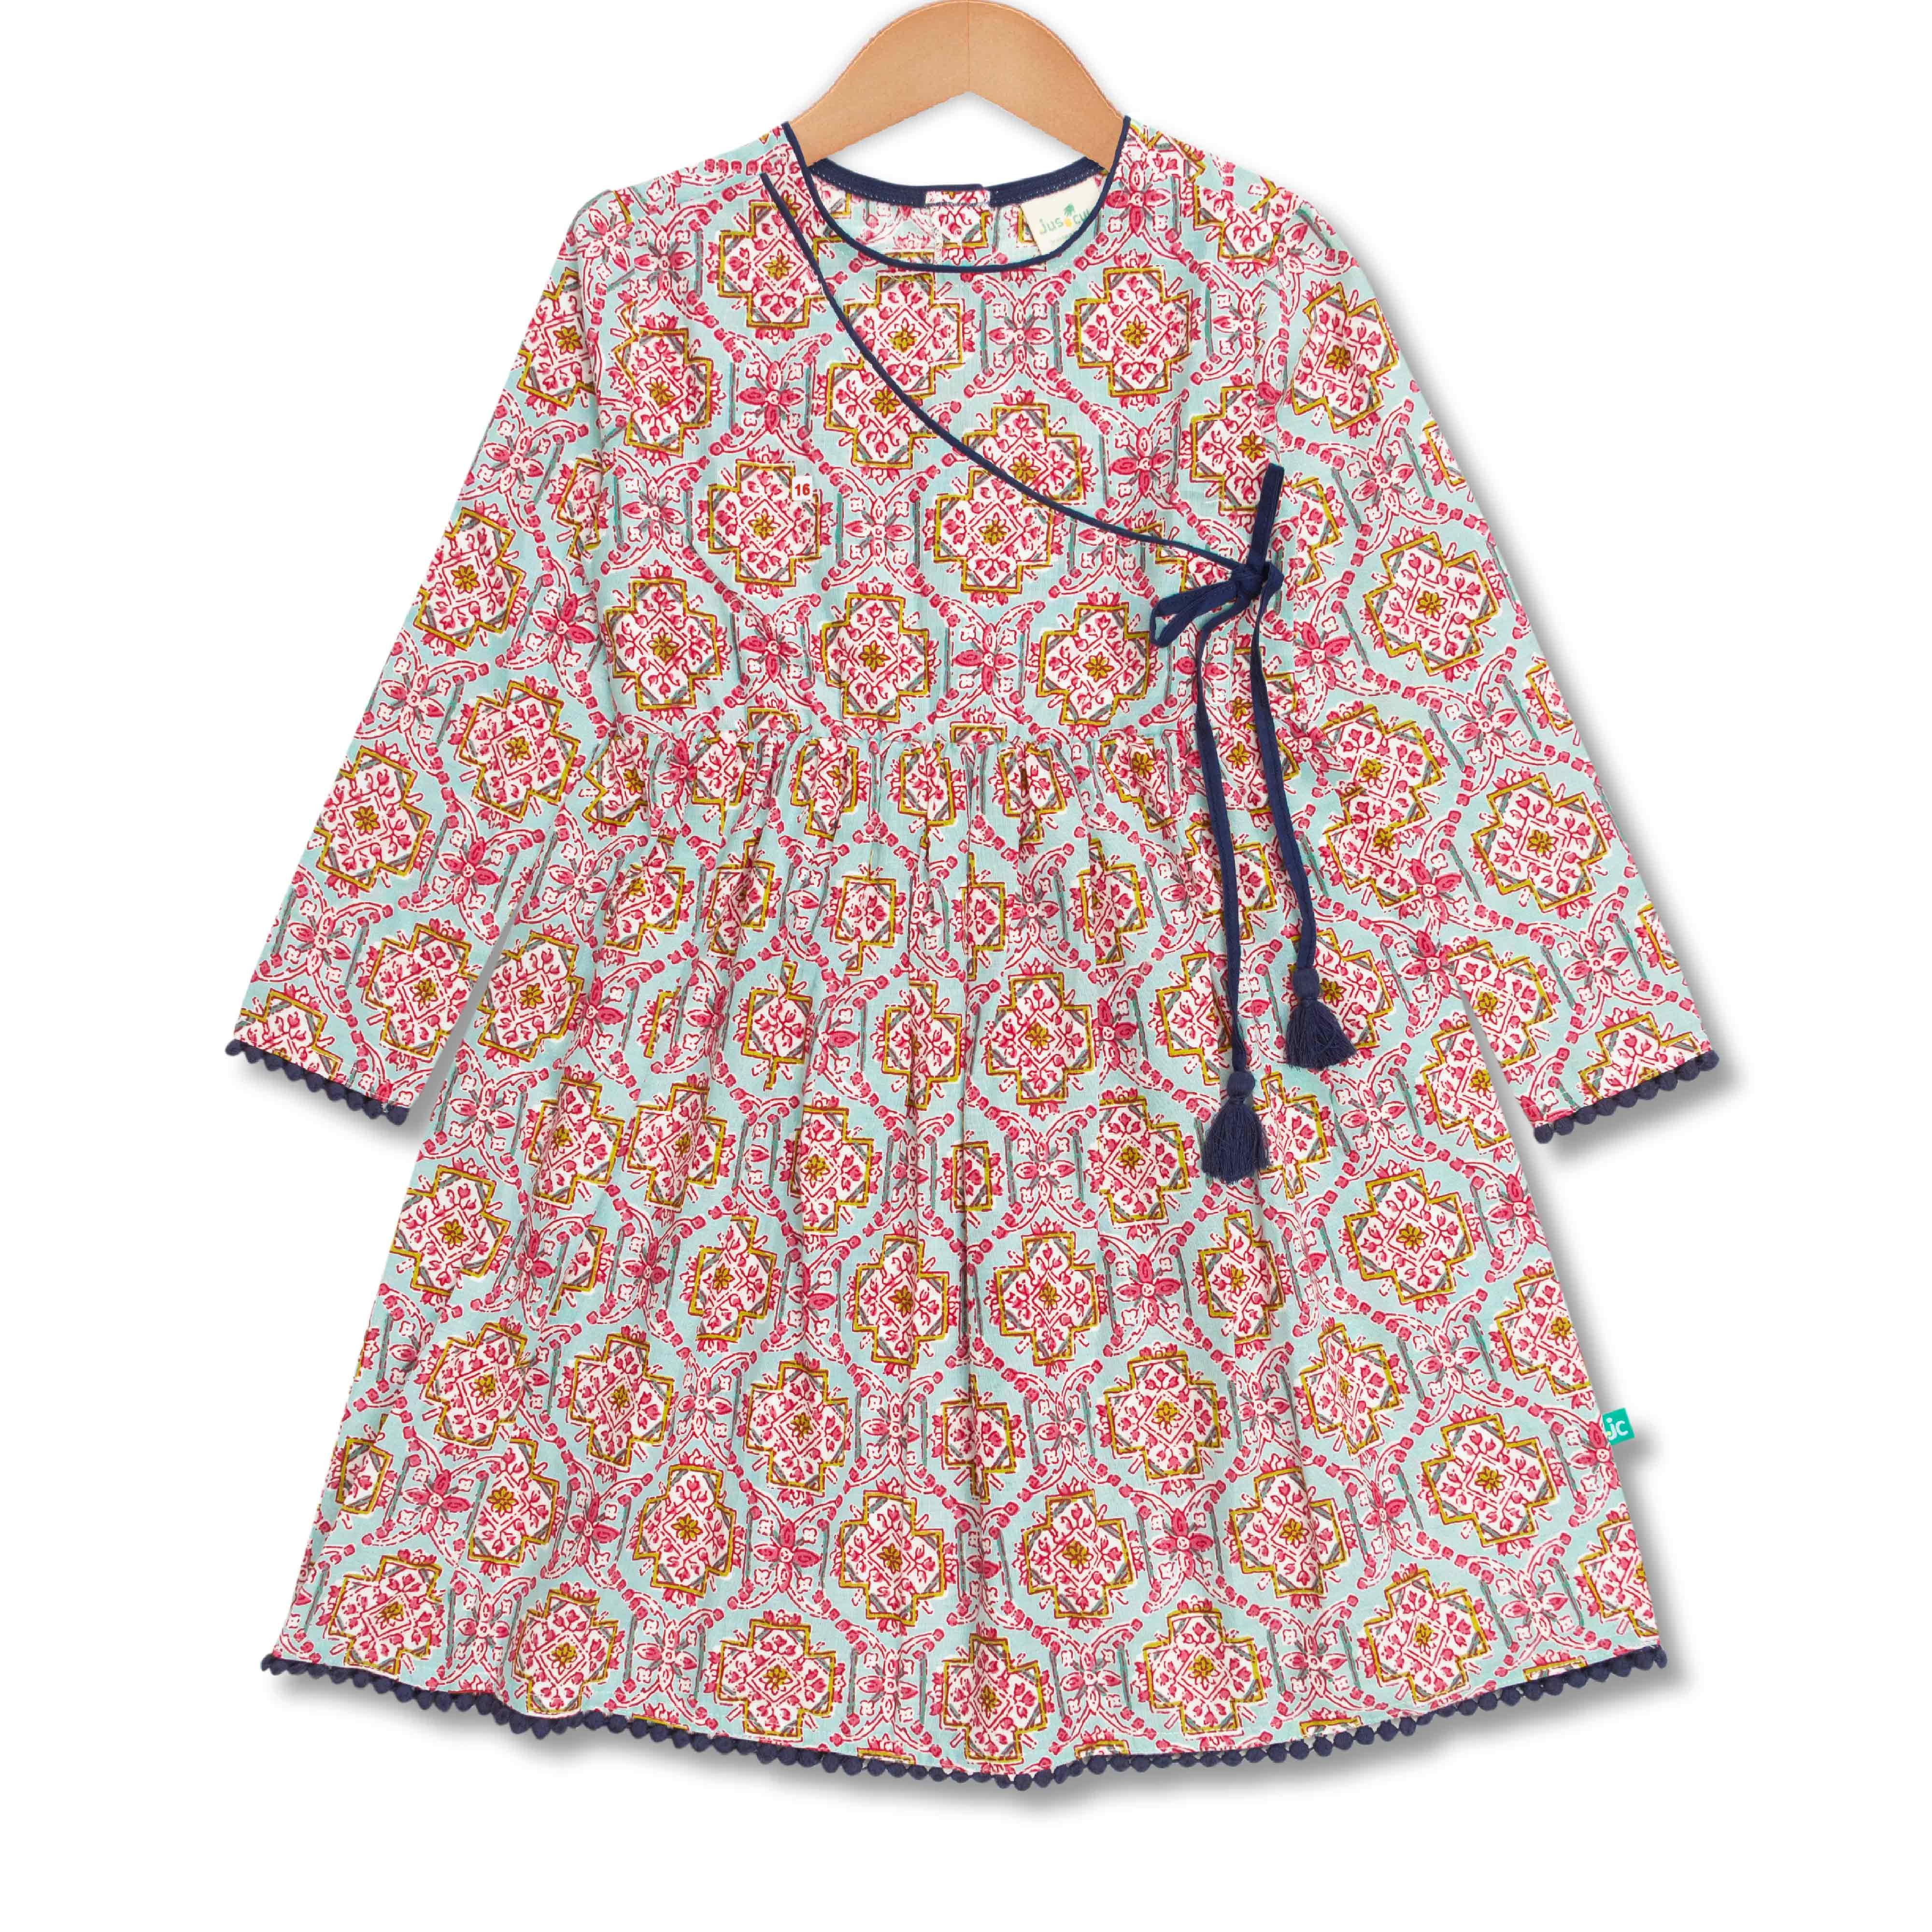 Young Girls All Over Printed Full Sleeve Dress